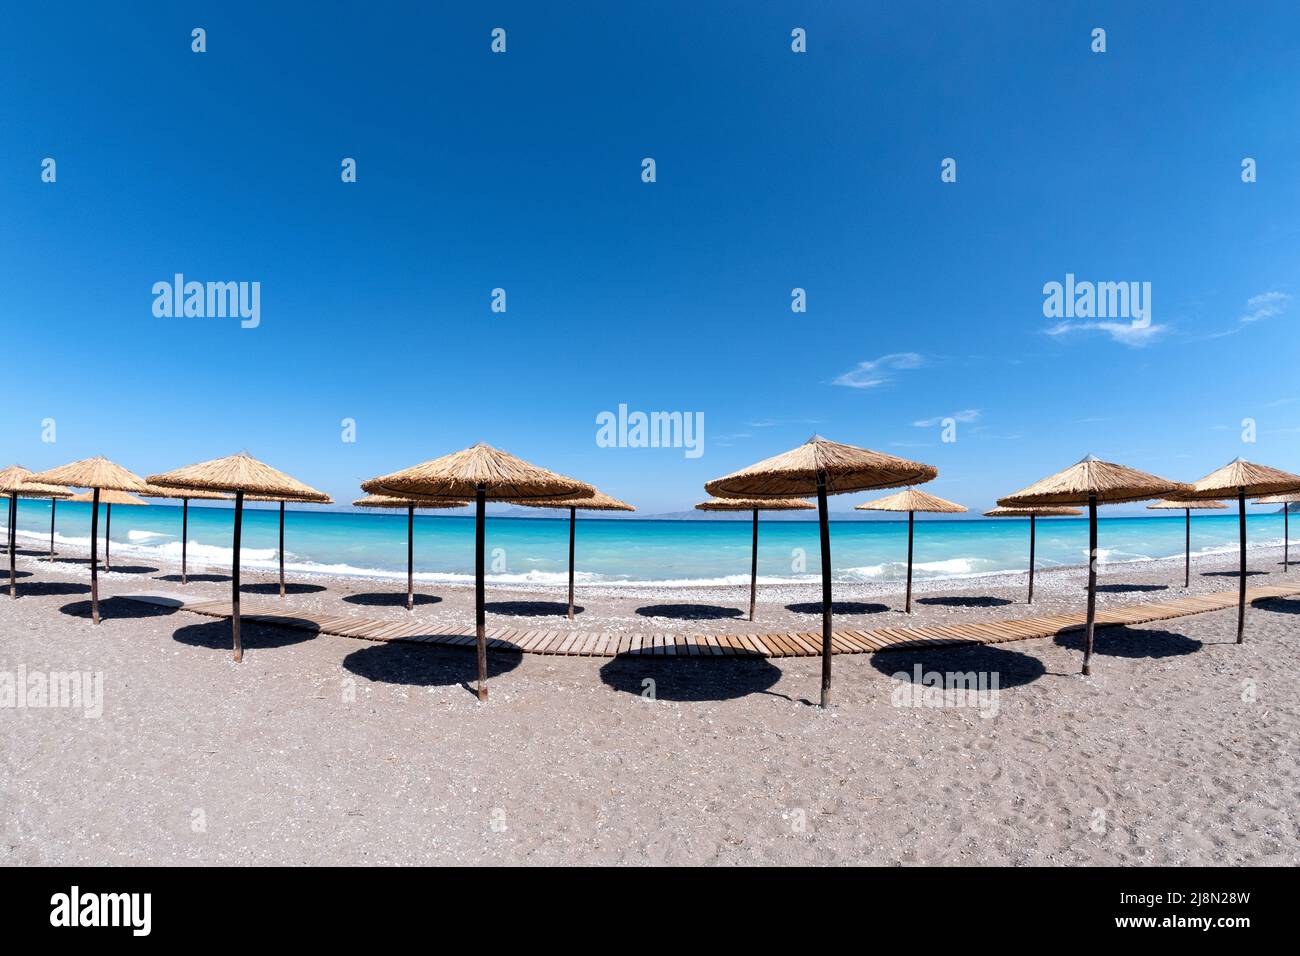 A row of  palm parasols or thatched beach umbrellas lined up in neat rows on an empty sandy beach with a turquoise sea as a backdrop and a blue sky Stock Photo